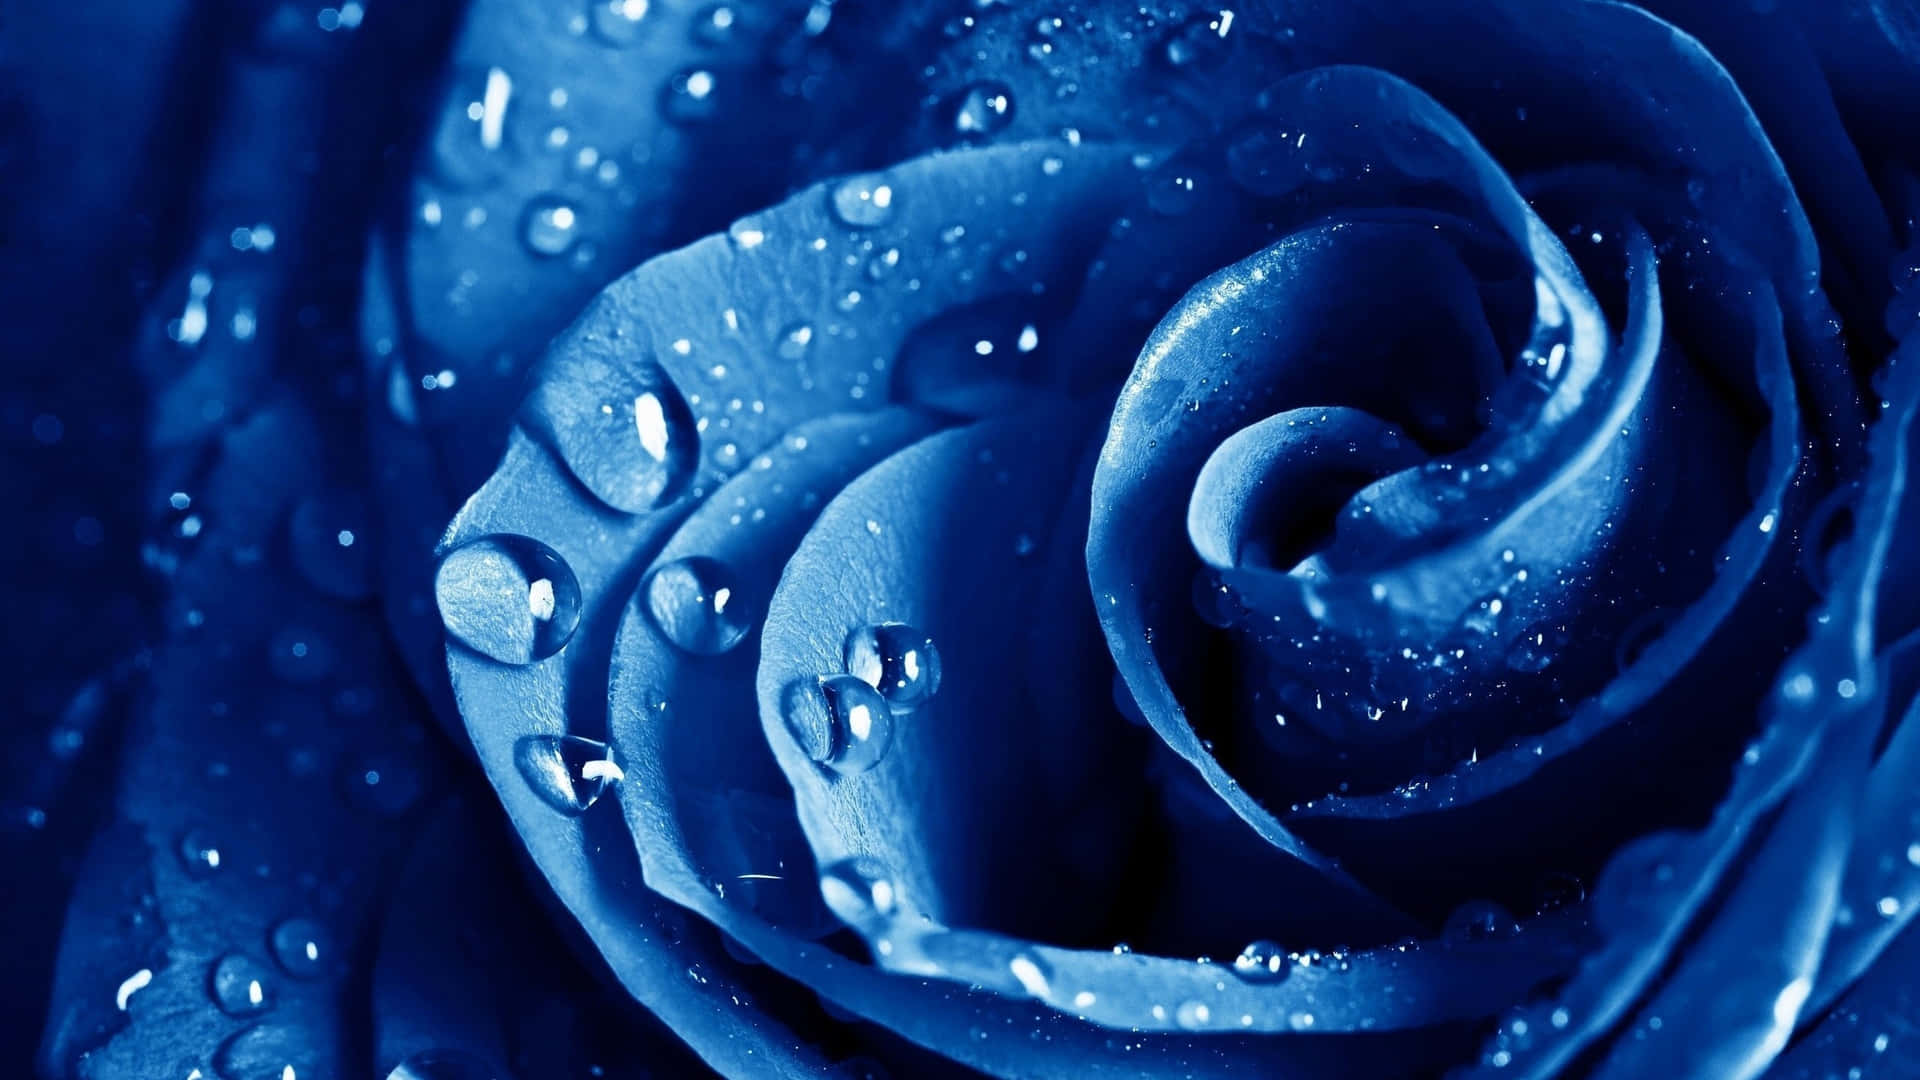 Navy Blue Rosewith Dew Drops Wallpaper